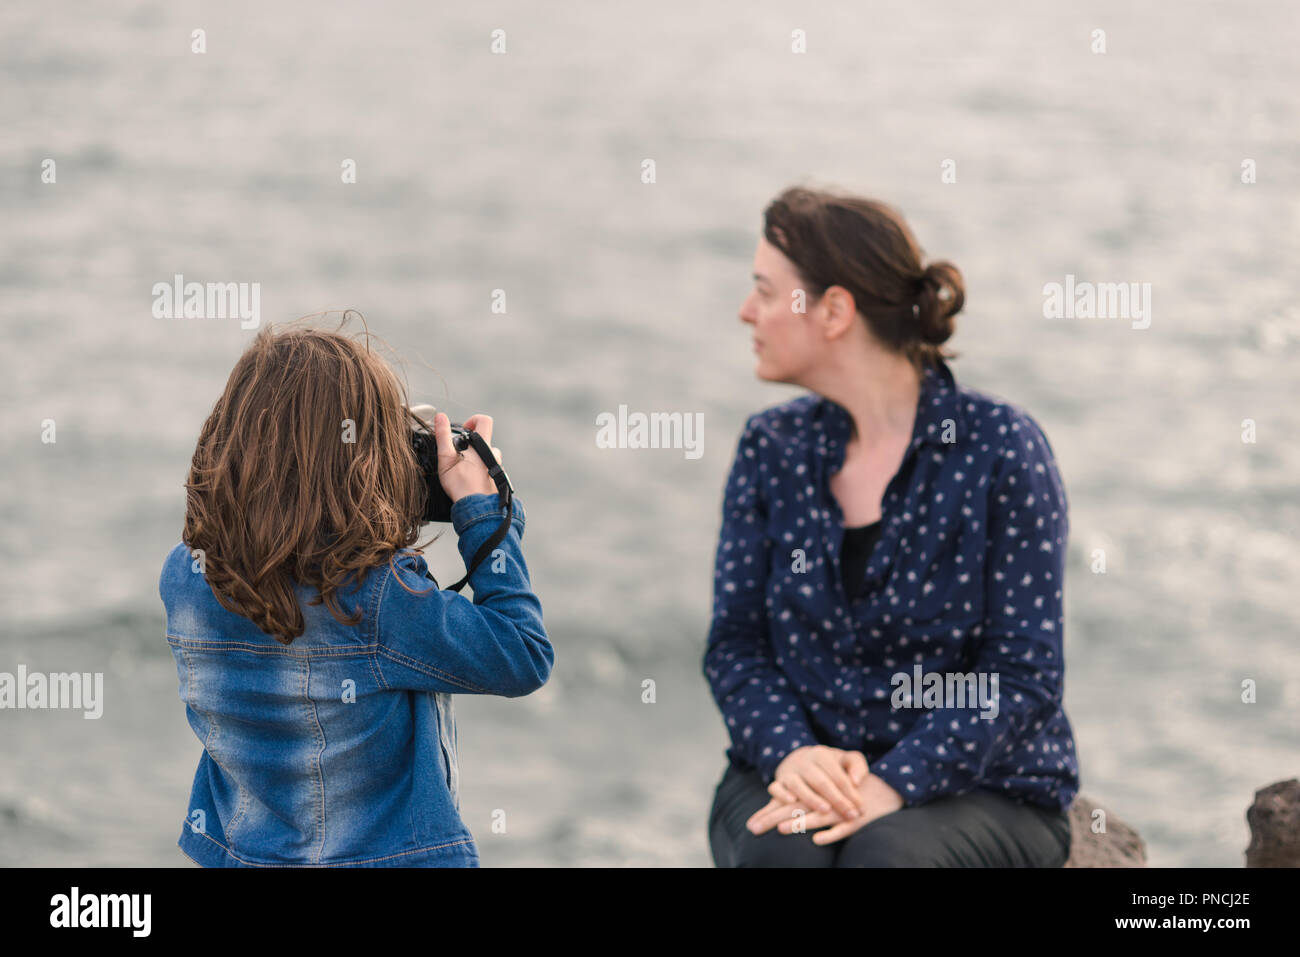 Child photographing a woman, young girl photographing her mother, child photographer Stock Photo